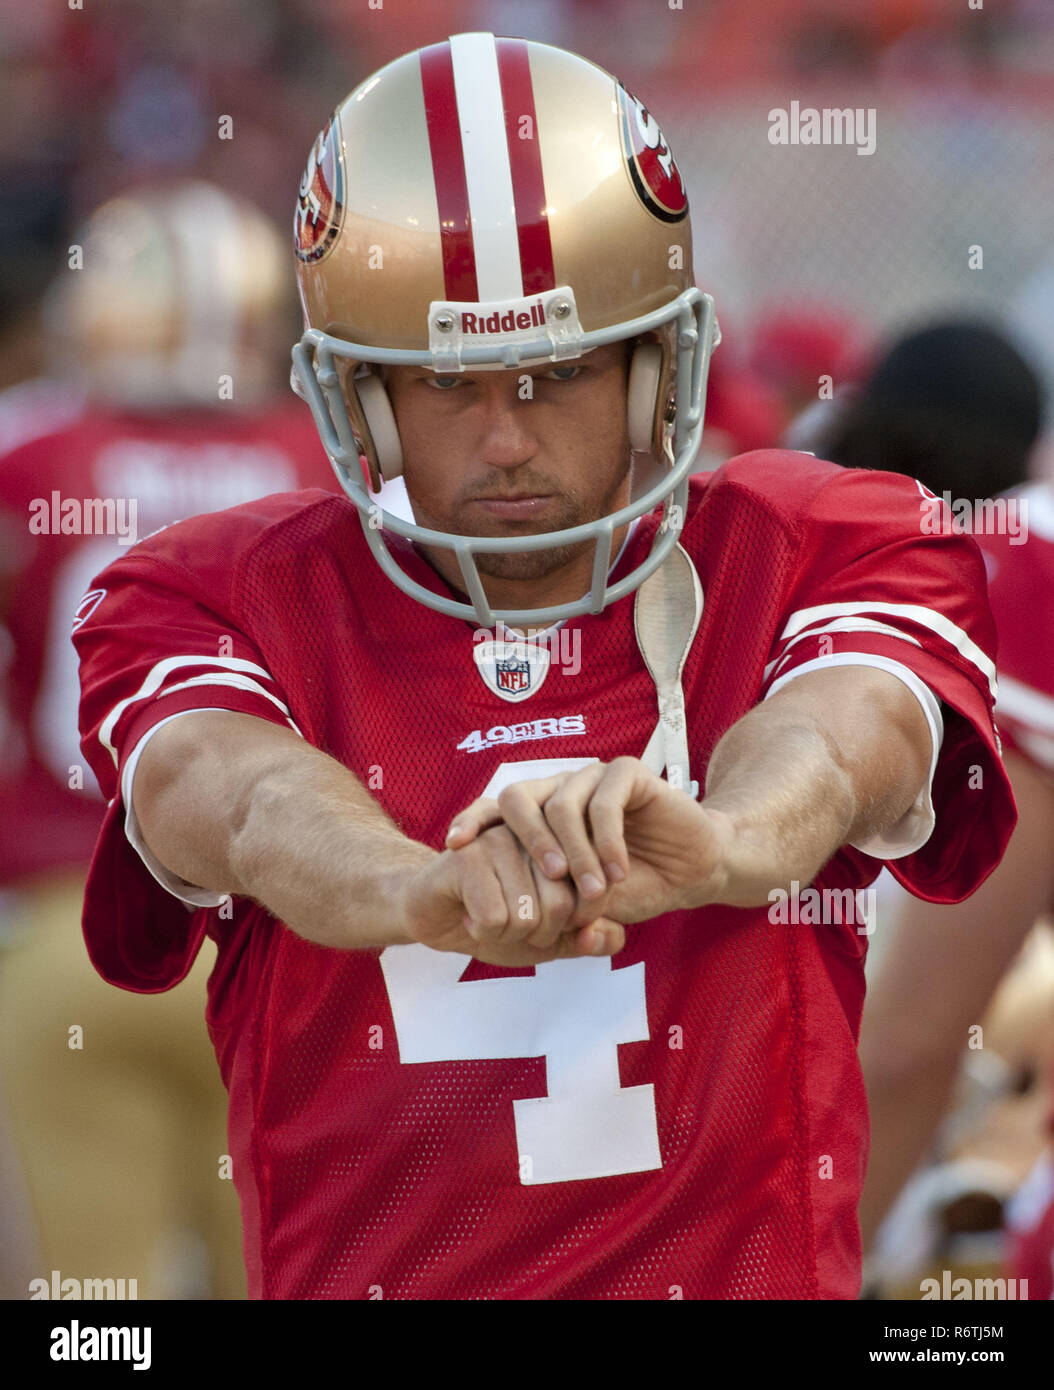 August 27, 2011 - San Francisco, California, U.S - Stretching on the sidelines San Francisco 49ers punter Andy Lee (4) on Sunday, August 27, 2011 at Candlestick Park, San Francisco, California.  The Texans defeated the 49ers in preseason game 30-7. (Credit Image: © Al Golub/ZUMA Wire) Stock Photo